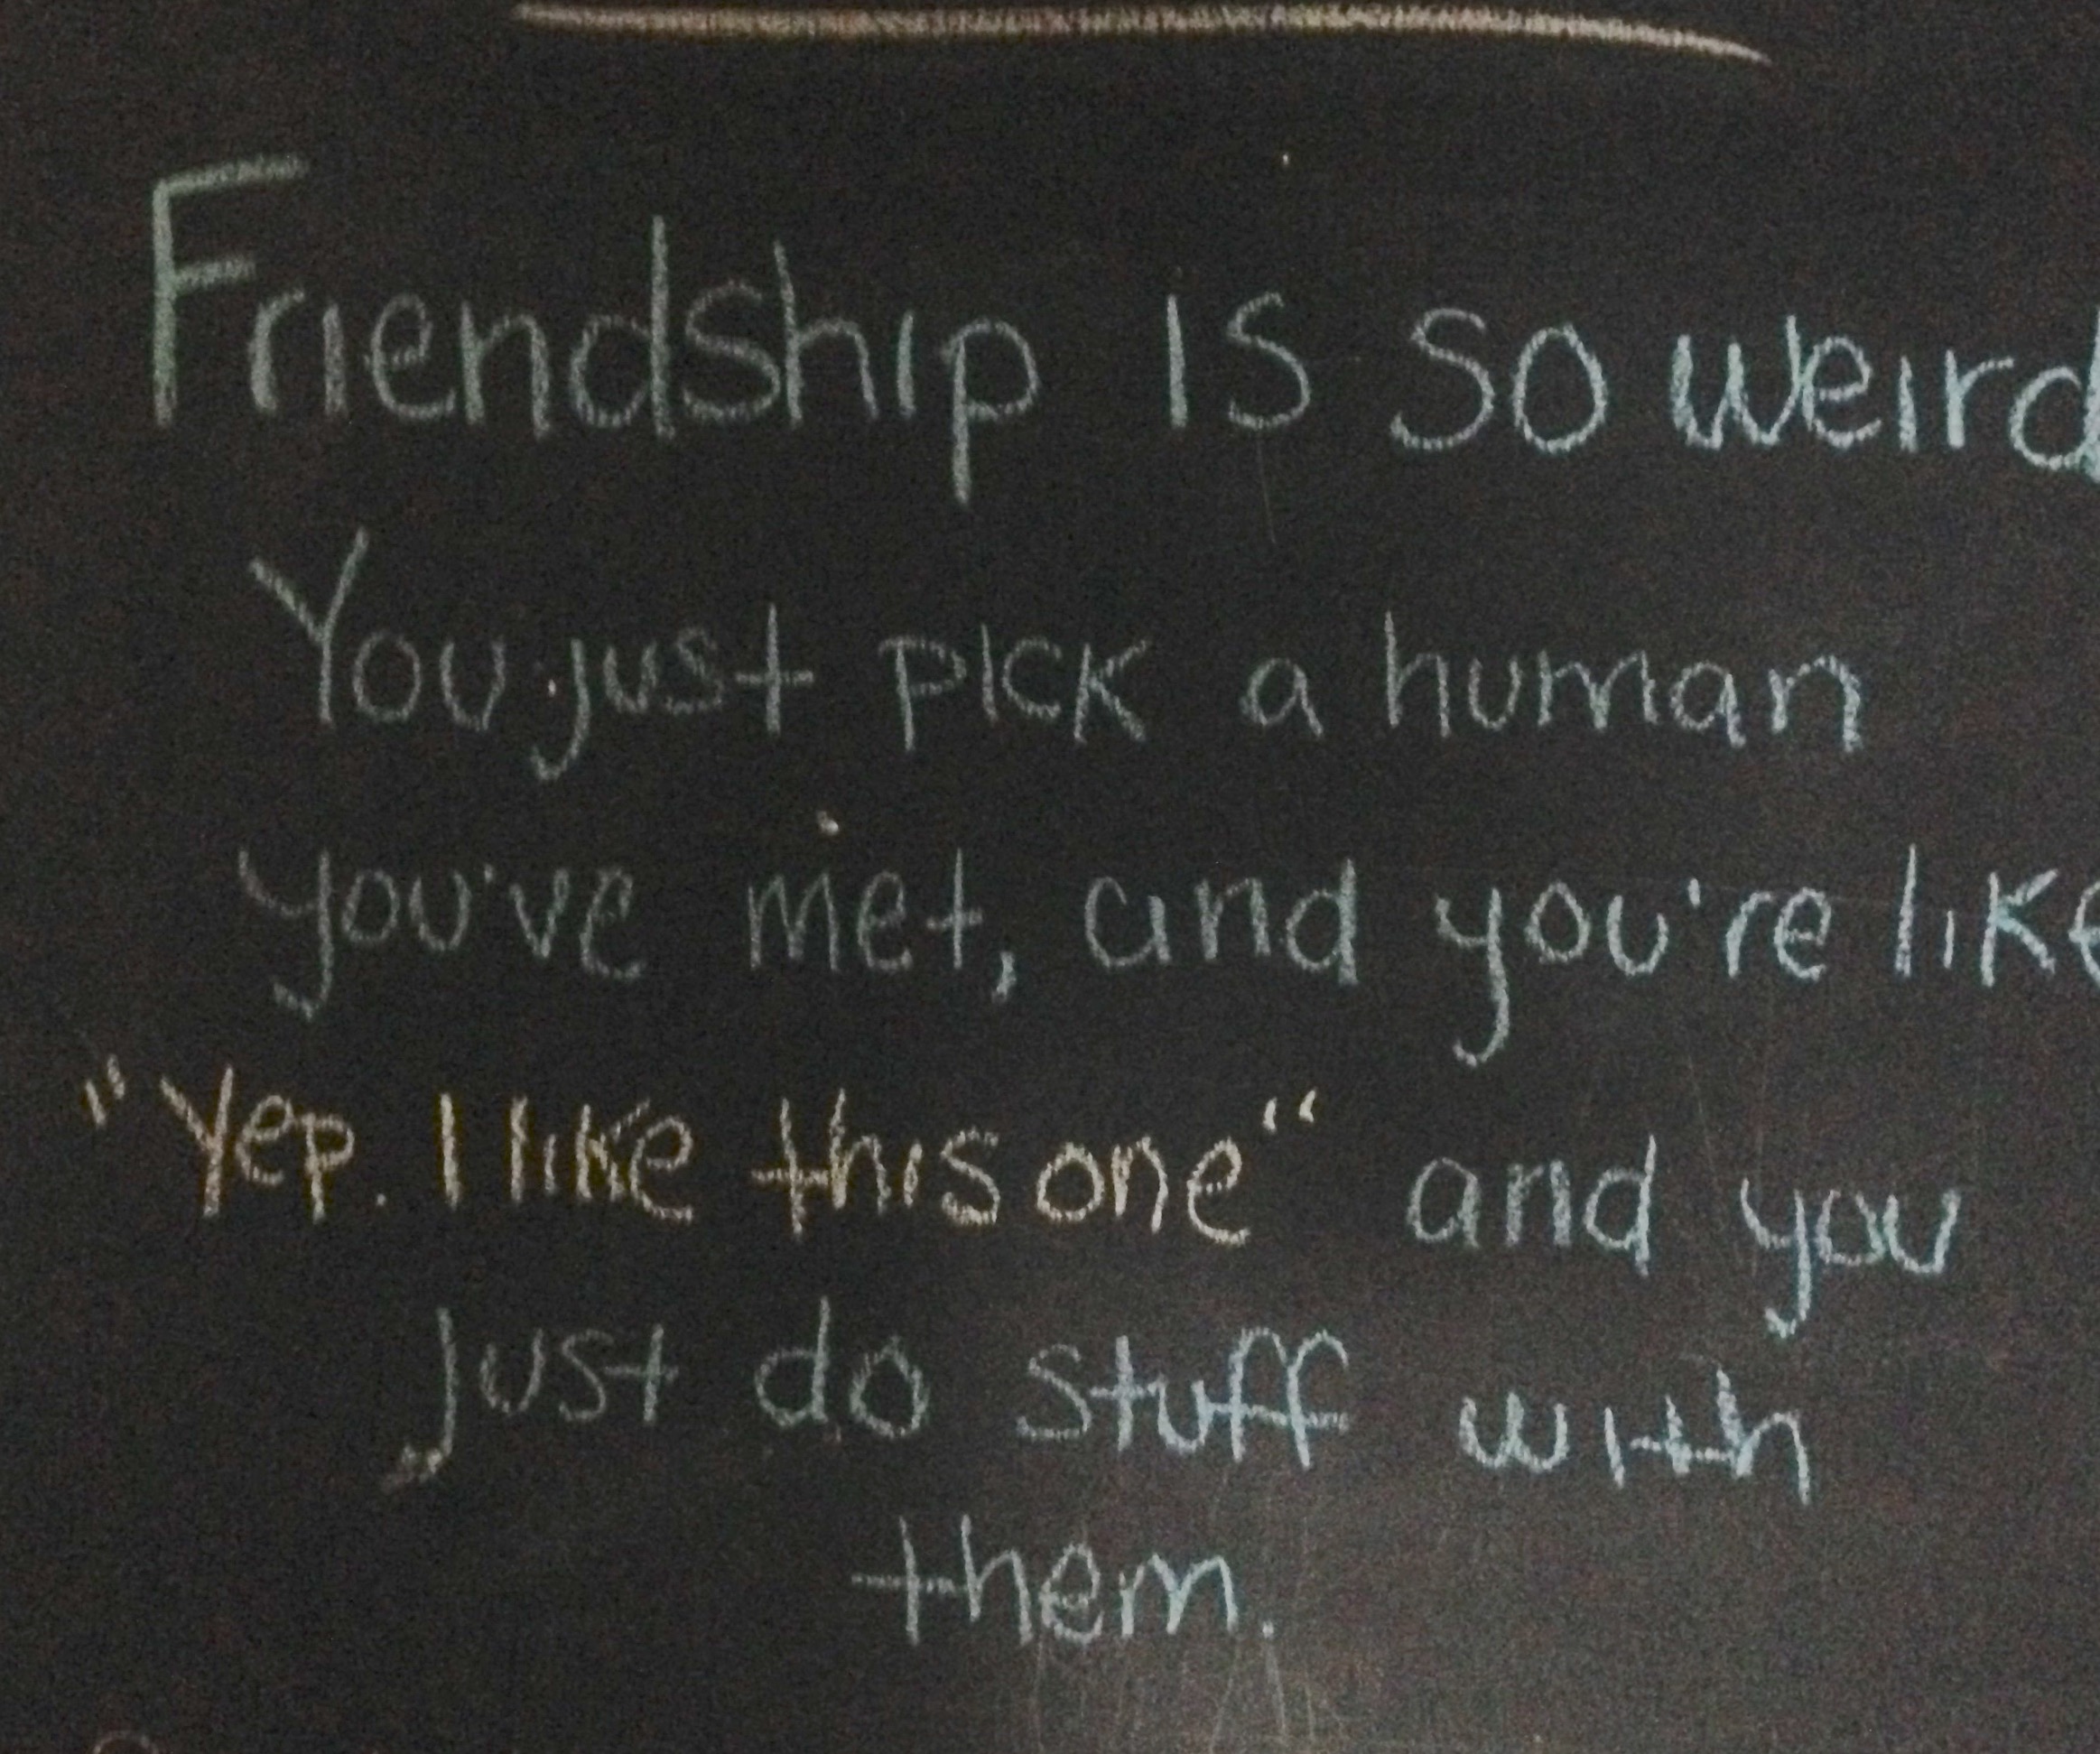 blackboard - Friendship is so weird You just Pick a human you've niet, and you're "Yep. I this one" and you Just do stuff with them.